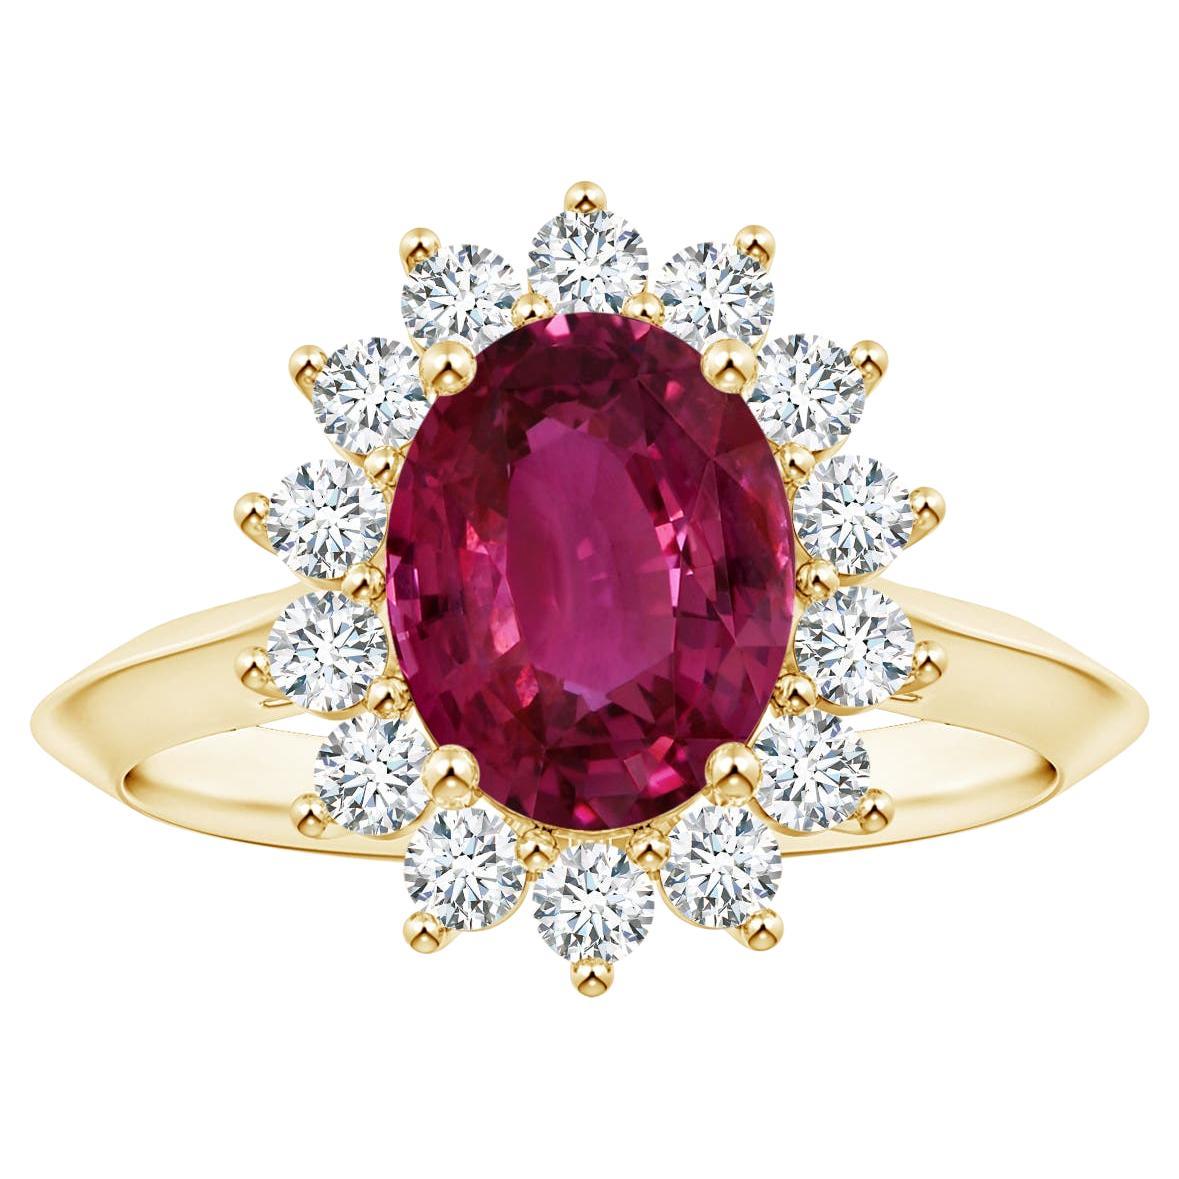 ANGARA Princess Diana Inspired GIA Certified Pink Sapphire Ring in Yellow Gold